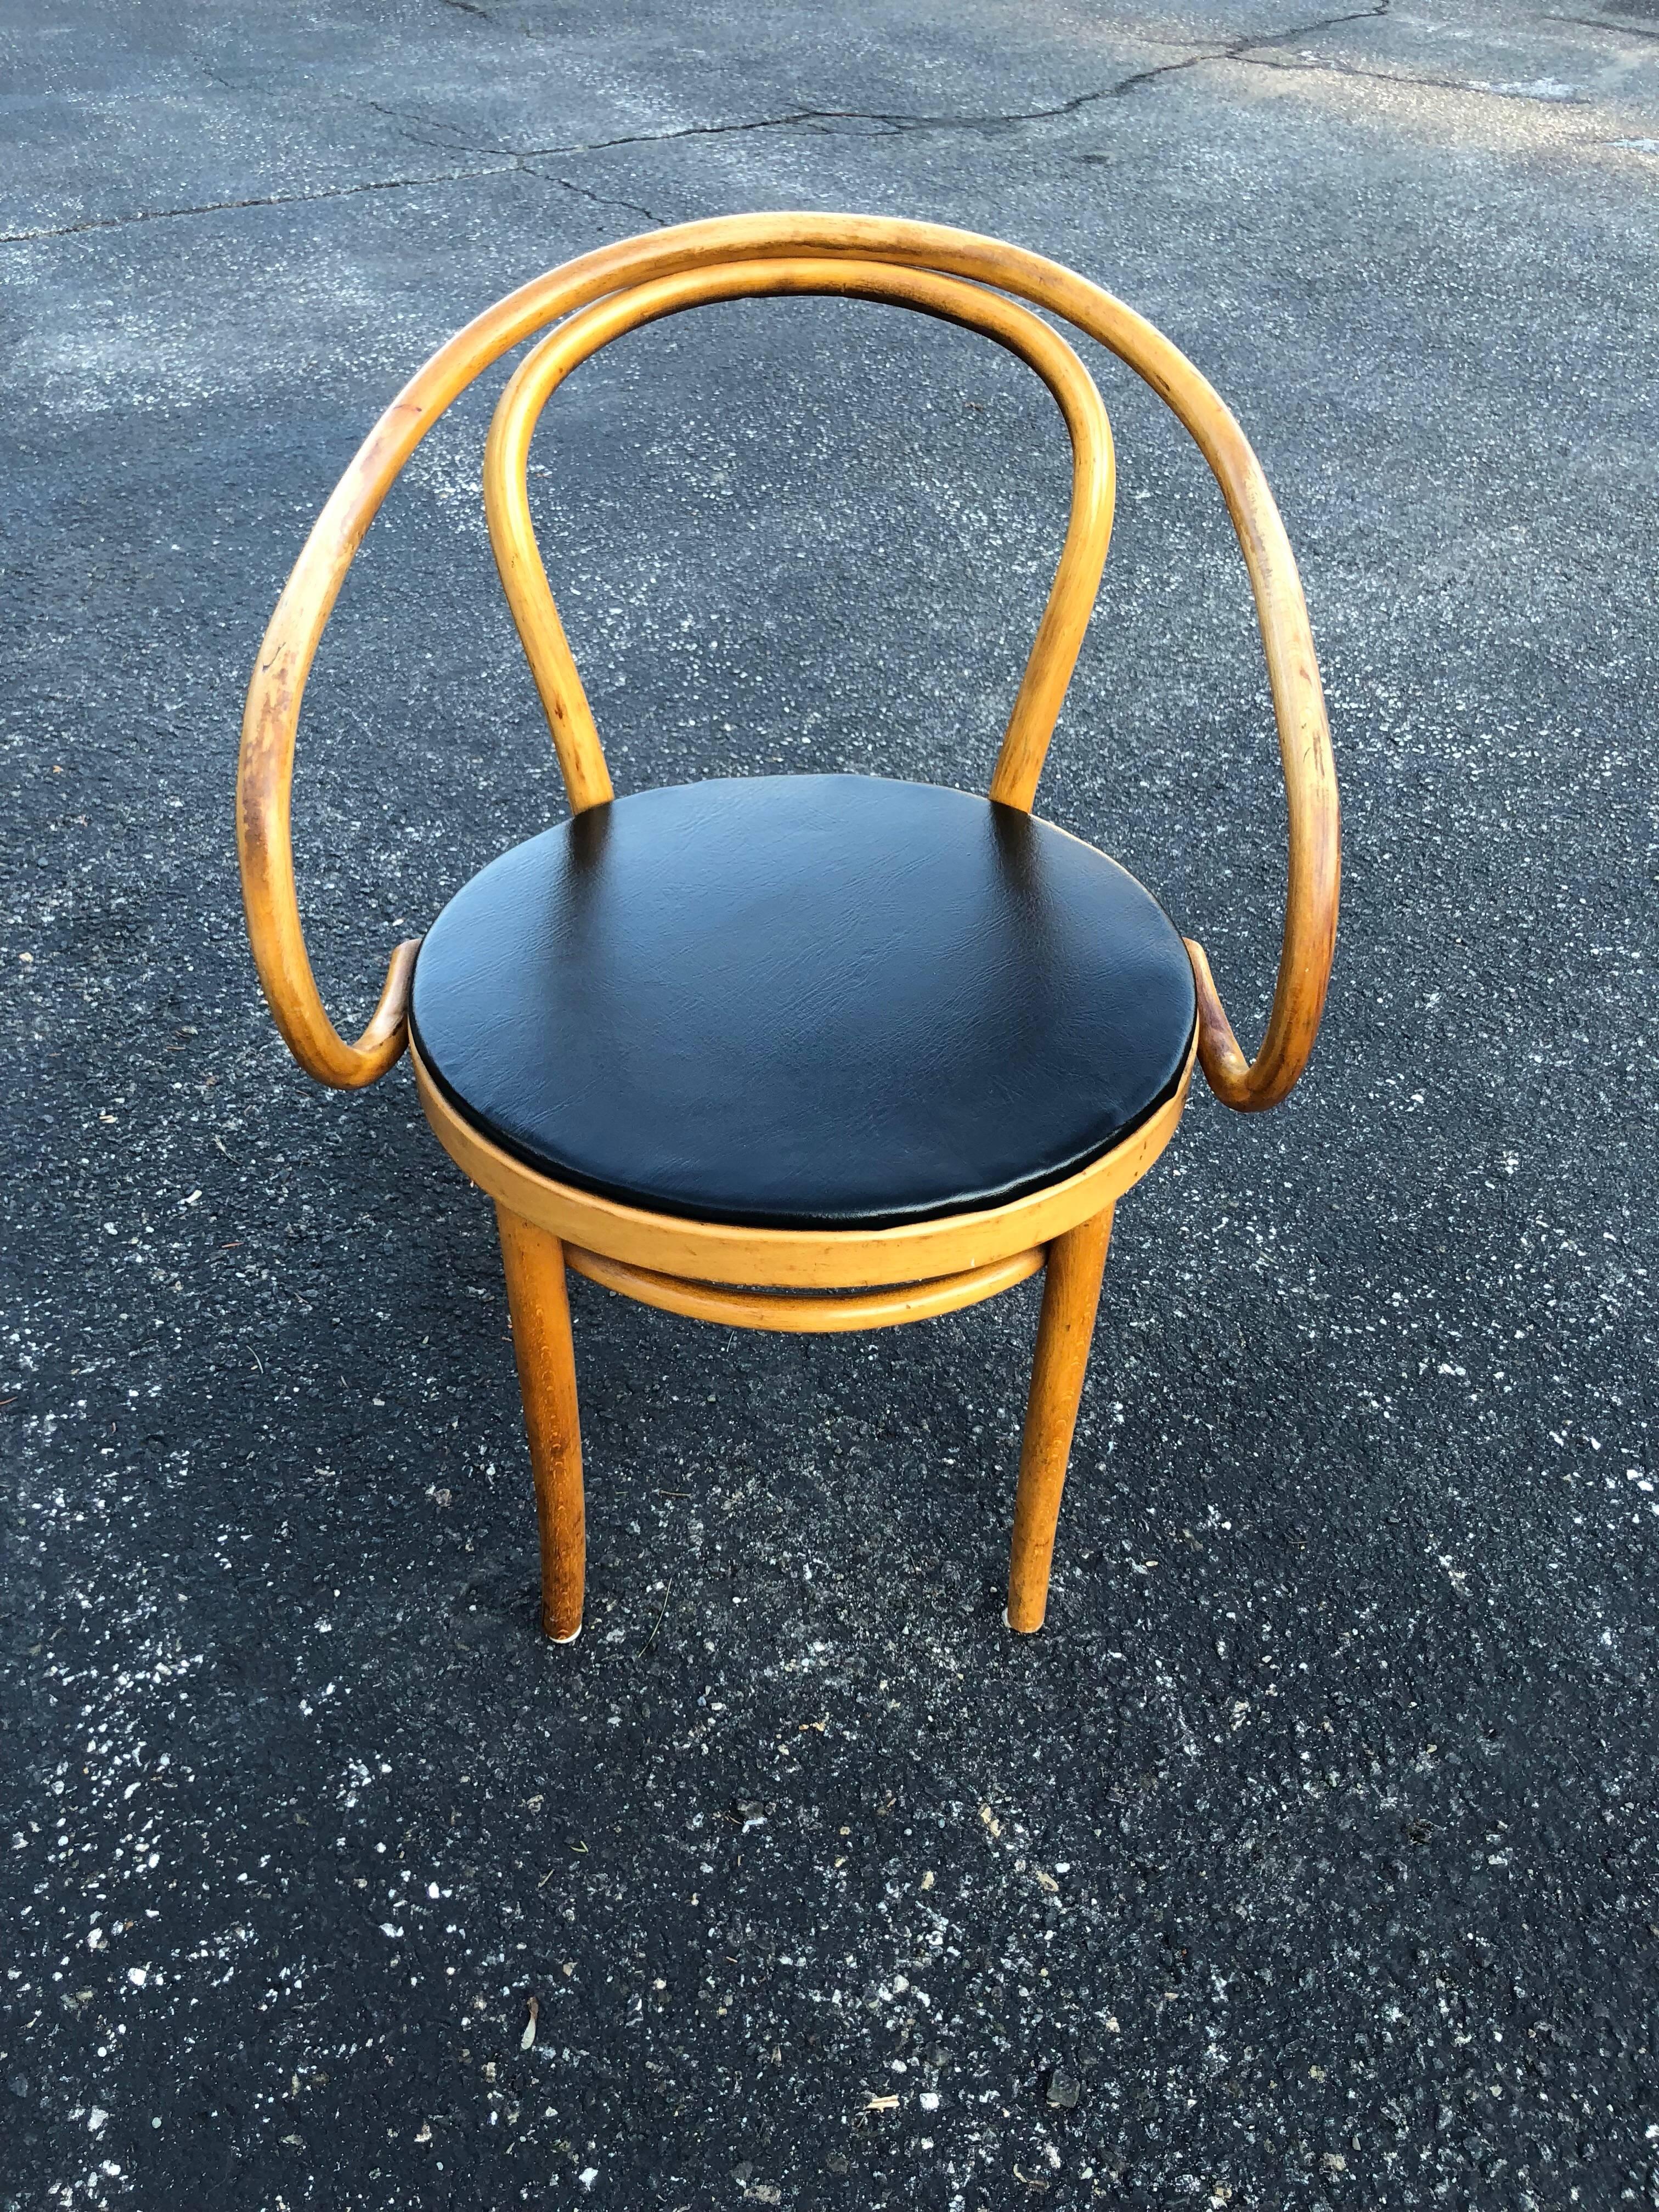 Vintage Thonet bentwood armchair with black vinyl seat cover.